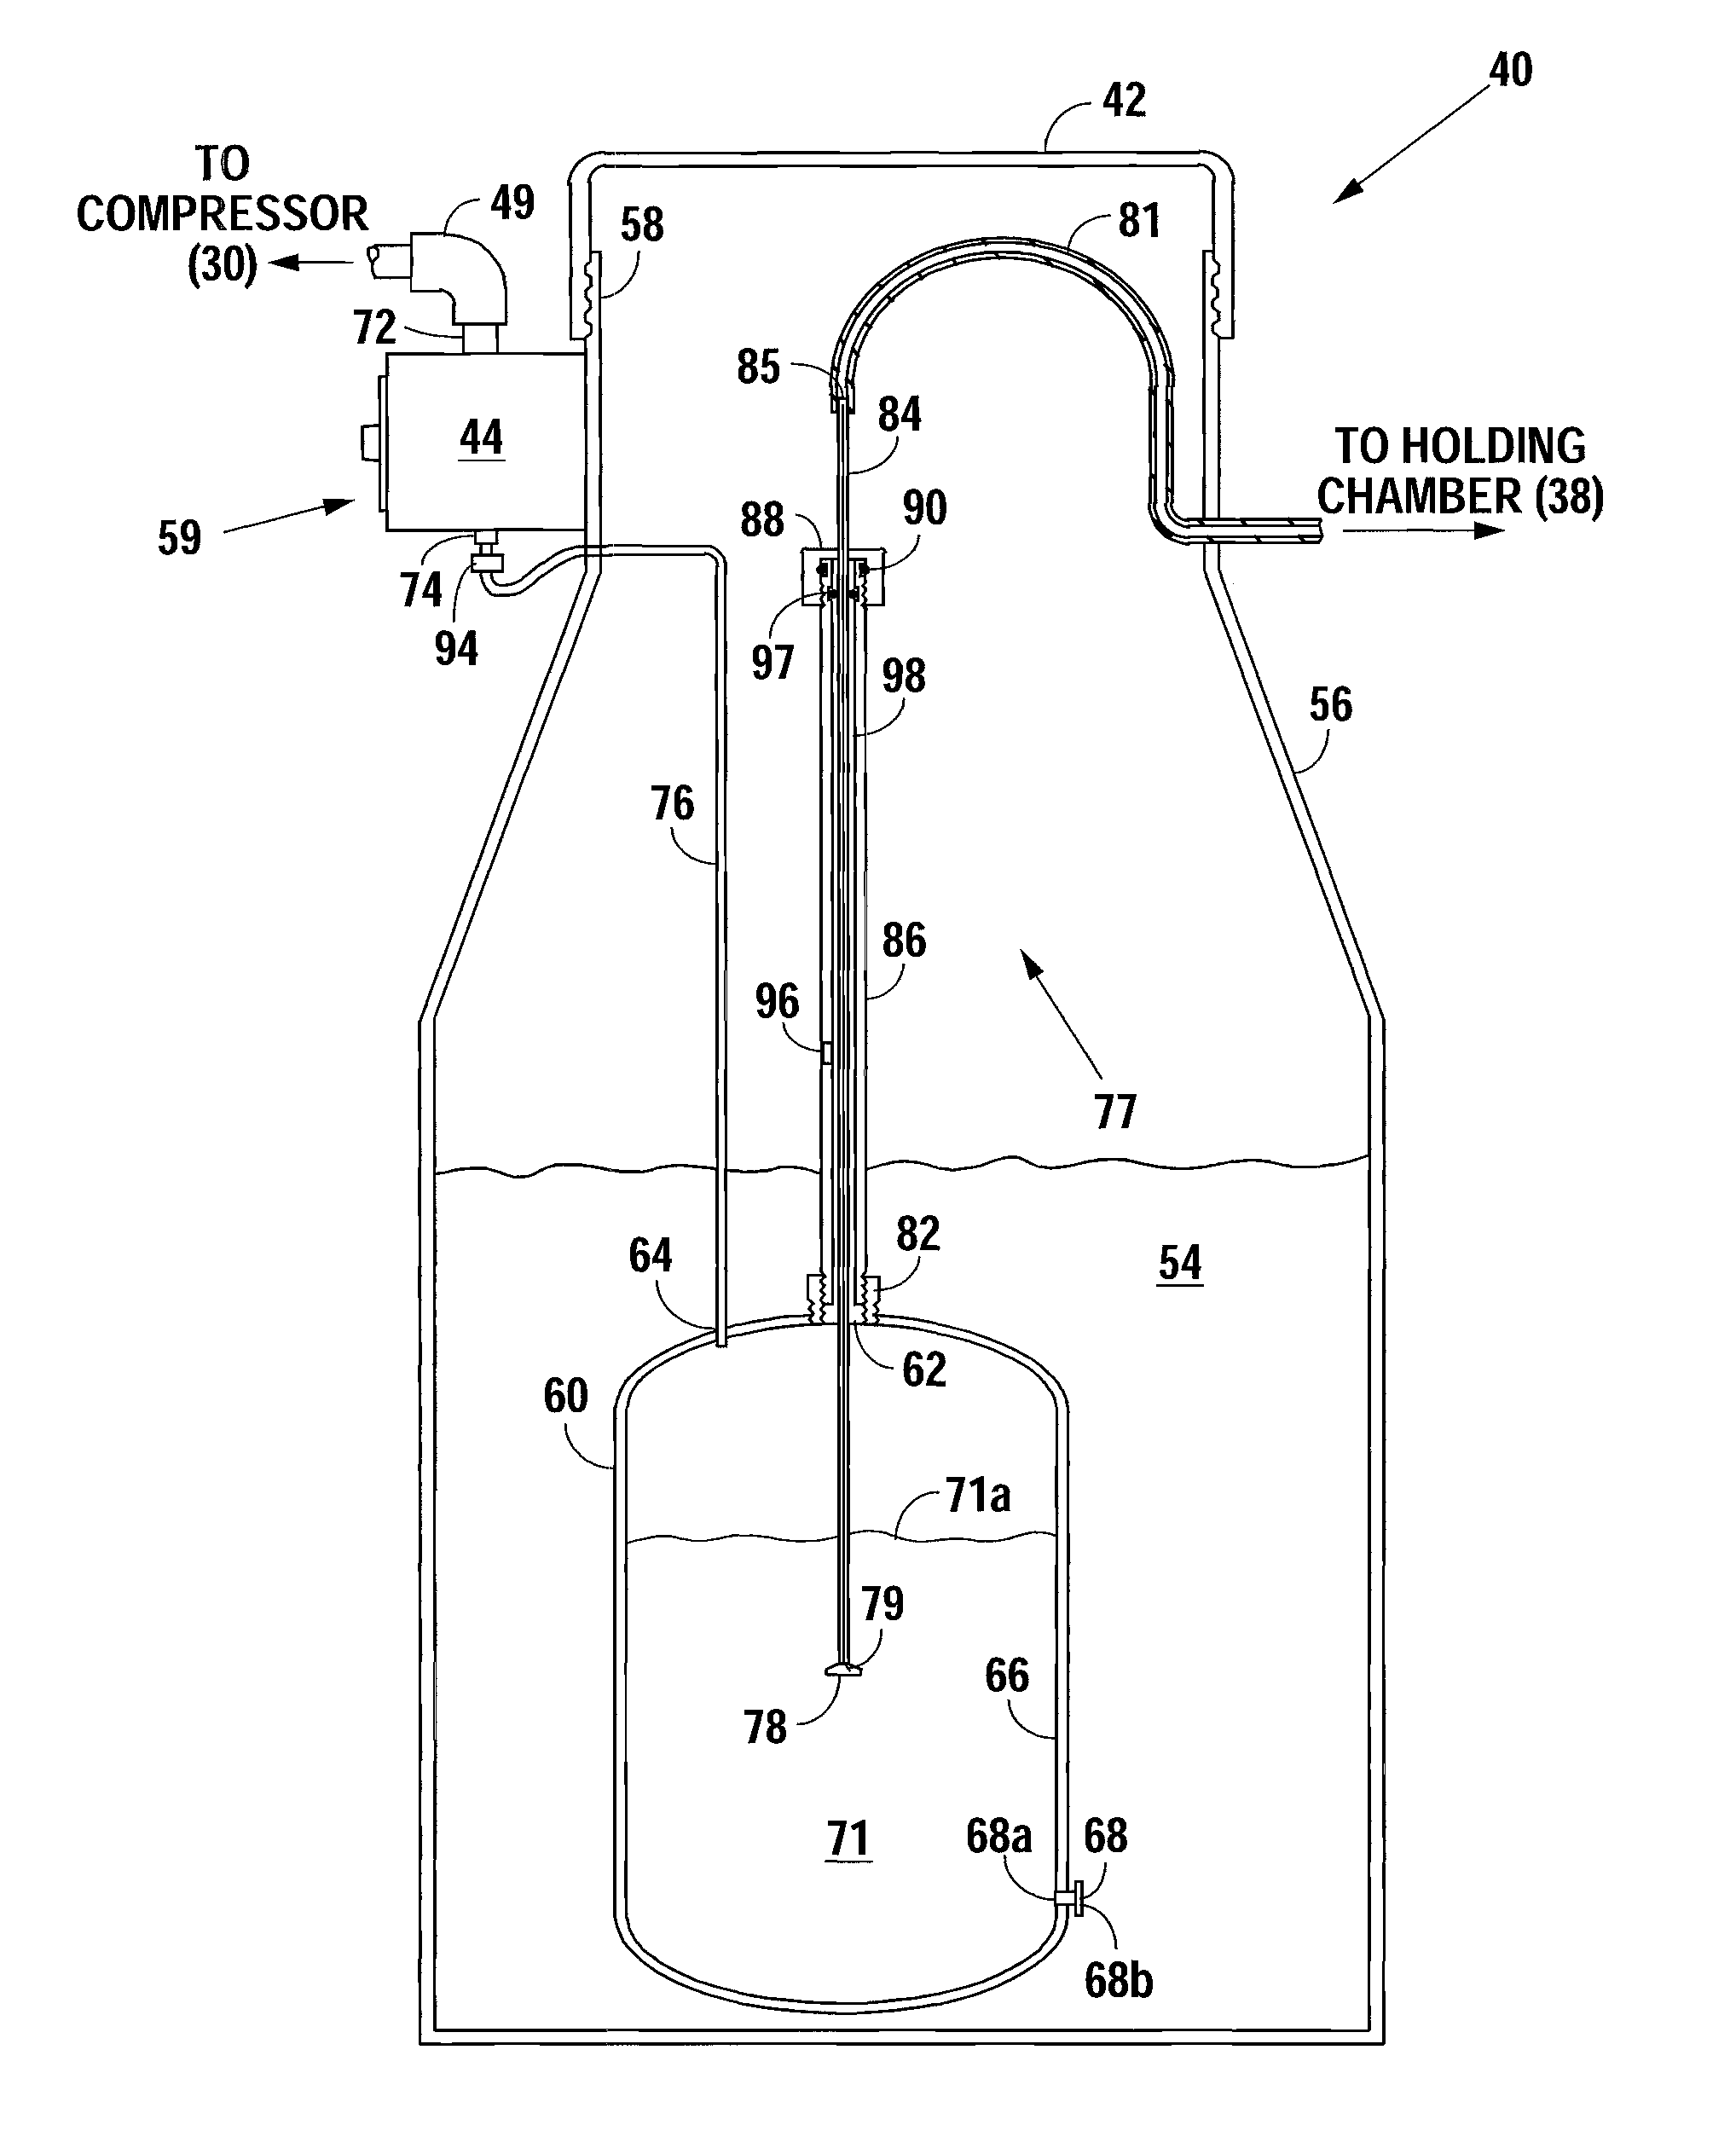 Pressure-actuated liquid disinfectant dispenser and method for an aerobic treatment system